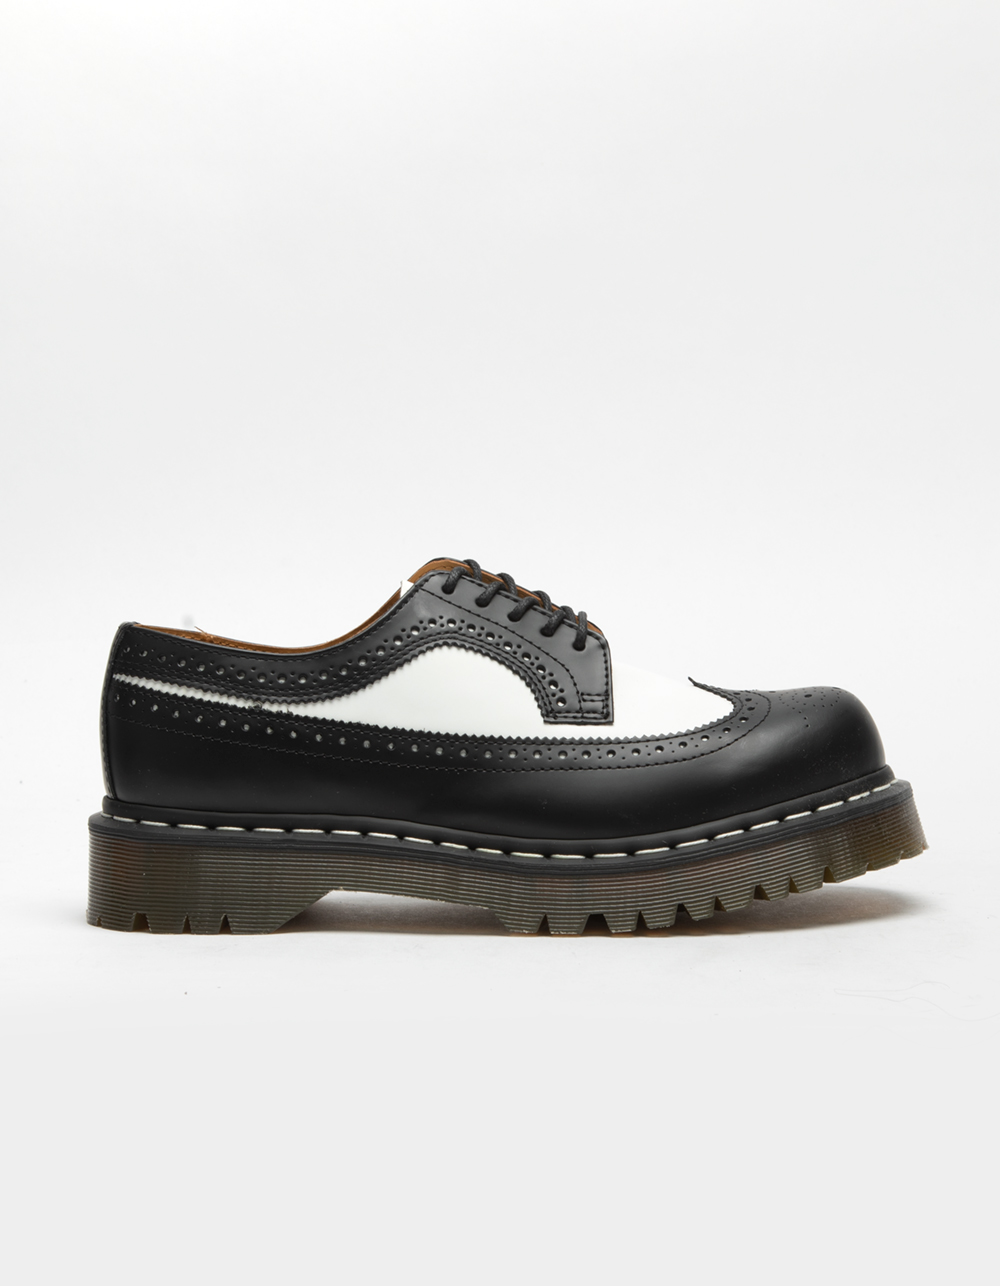 DR. MARTENS 3989 Bex Womens Shoes - IVORY | Tillys